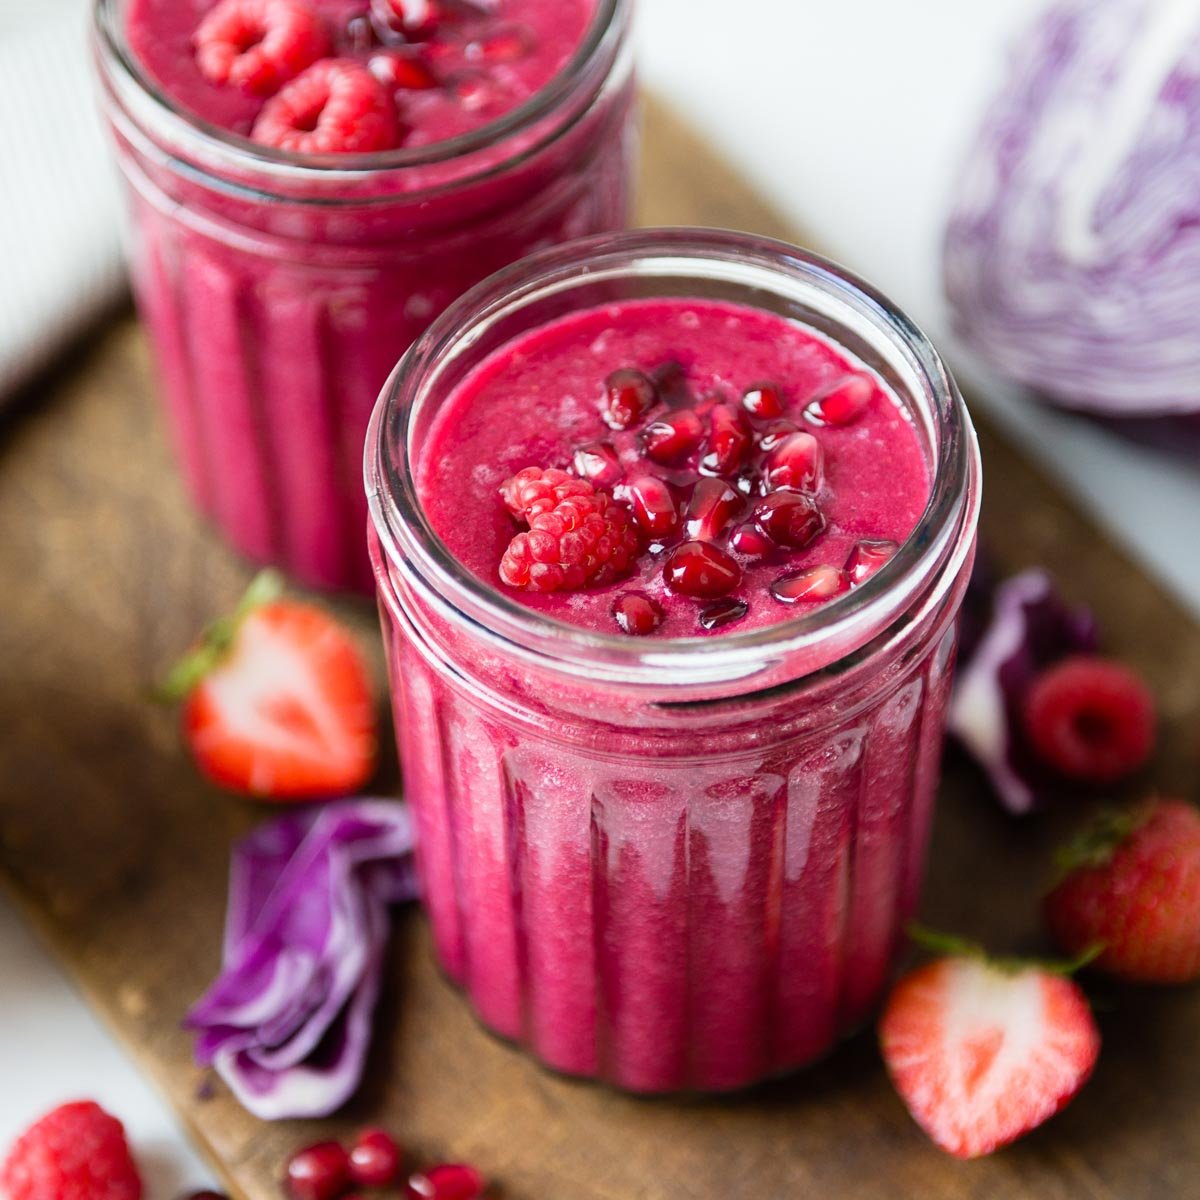 two glass jars full of pomegranate smoothies topped with pomegranate arils and raspberries, sitting on a wooden cutting board.